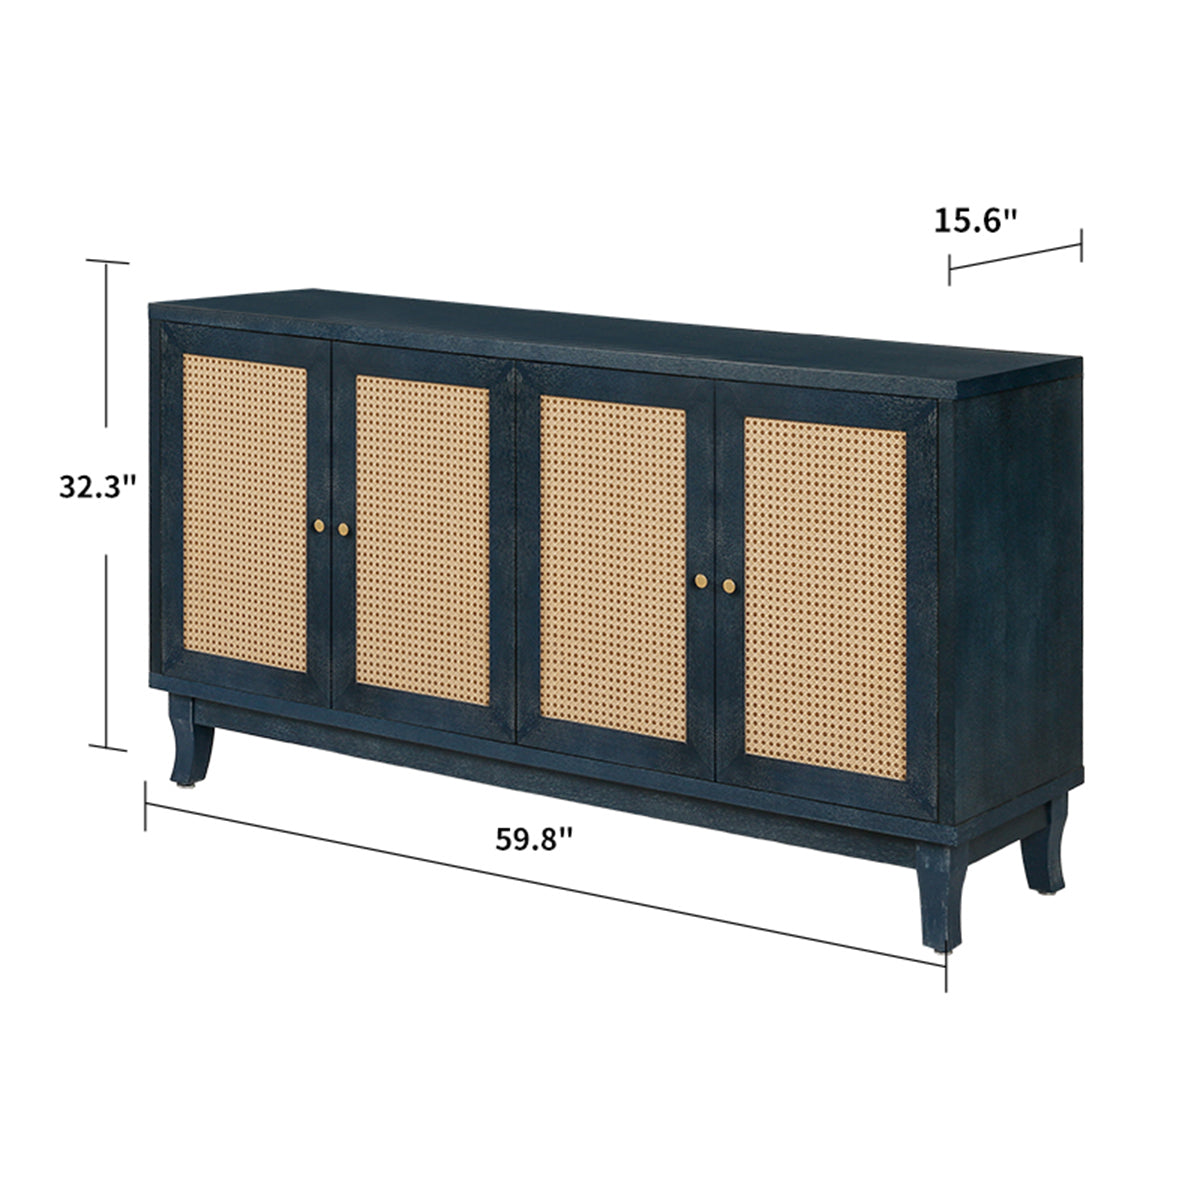 Softly Lacquer Finishes Accent Storage Cabinet Sideboard Wooden Cabinet with Antique Deep Blue 4Doors